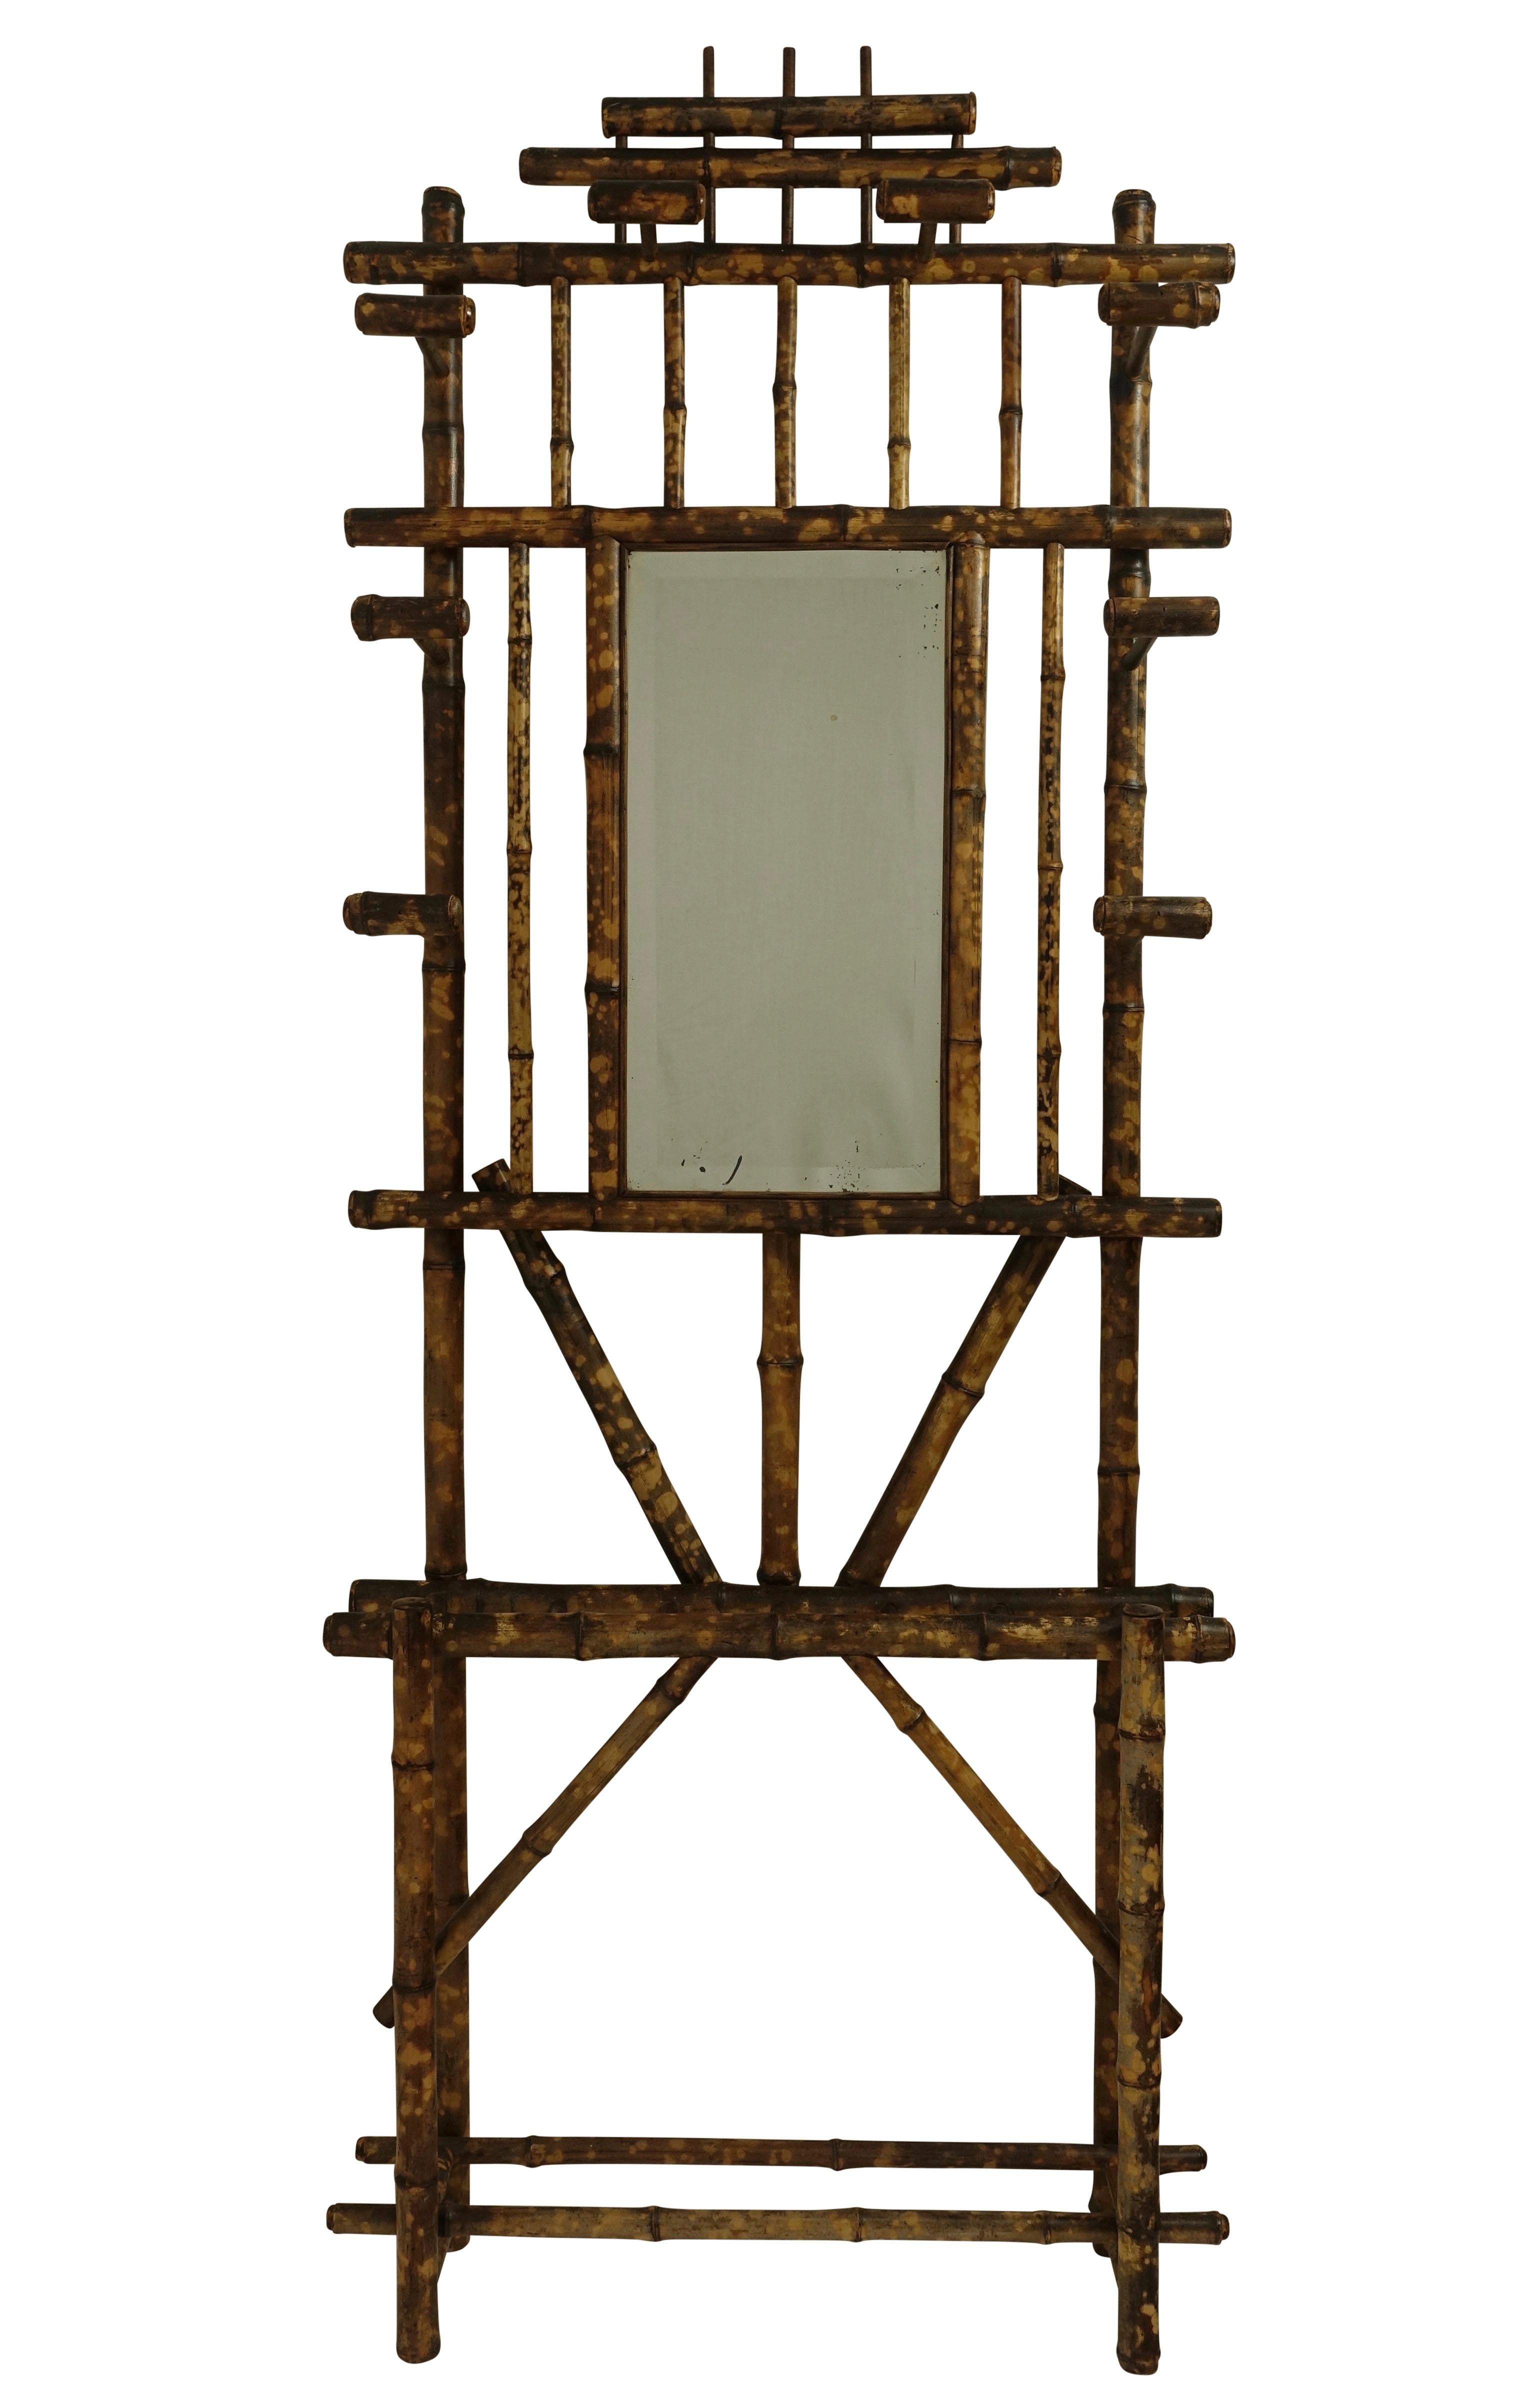 Robust bamboo hall tree, coat rack, umbrella stand with eight bamboo hooks for hanging coats and scarves framing the original large rectangular beveled mirror below which is divided spaces for umbrella, canes, hiking poles. Late 19th century,